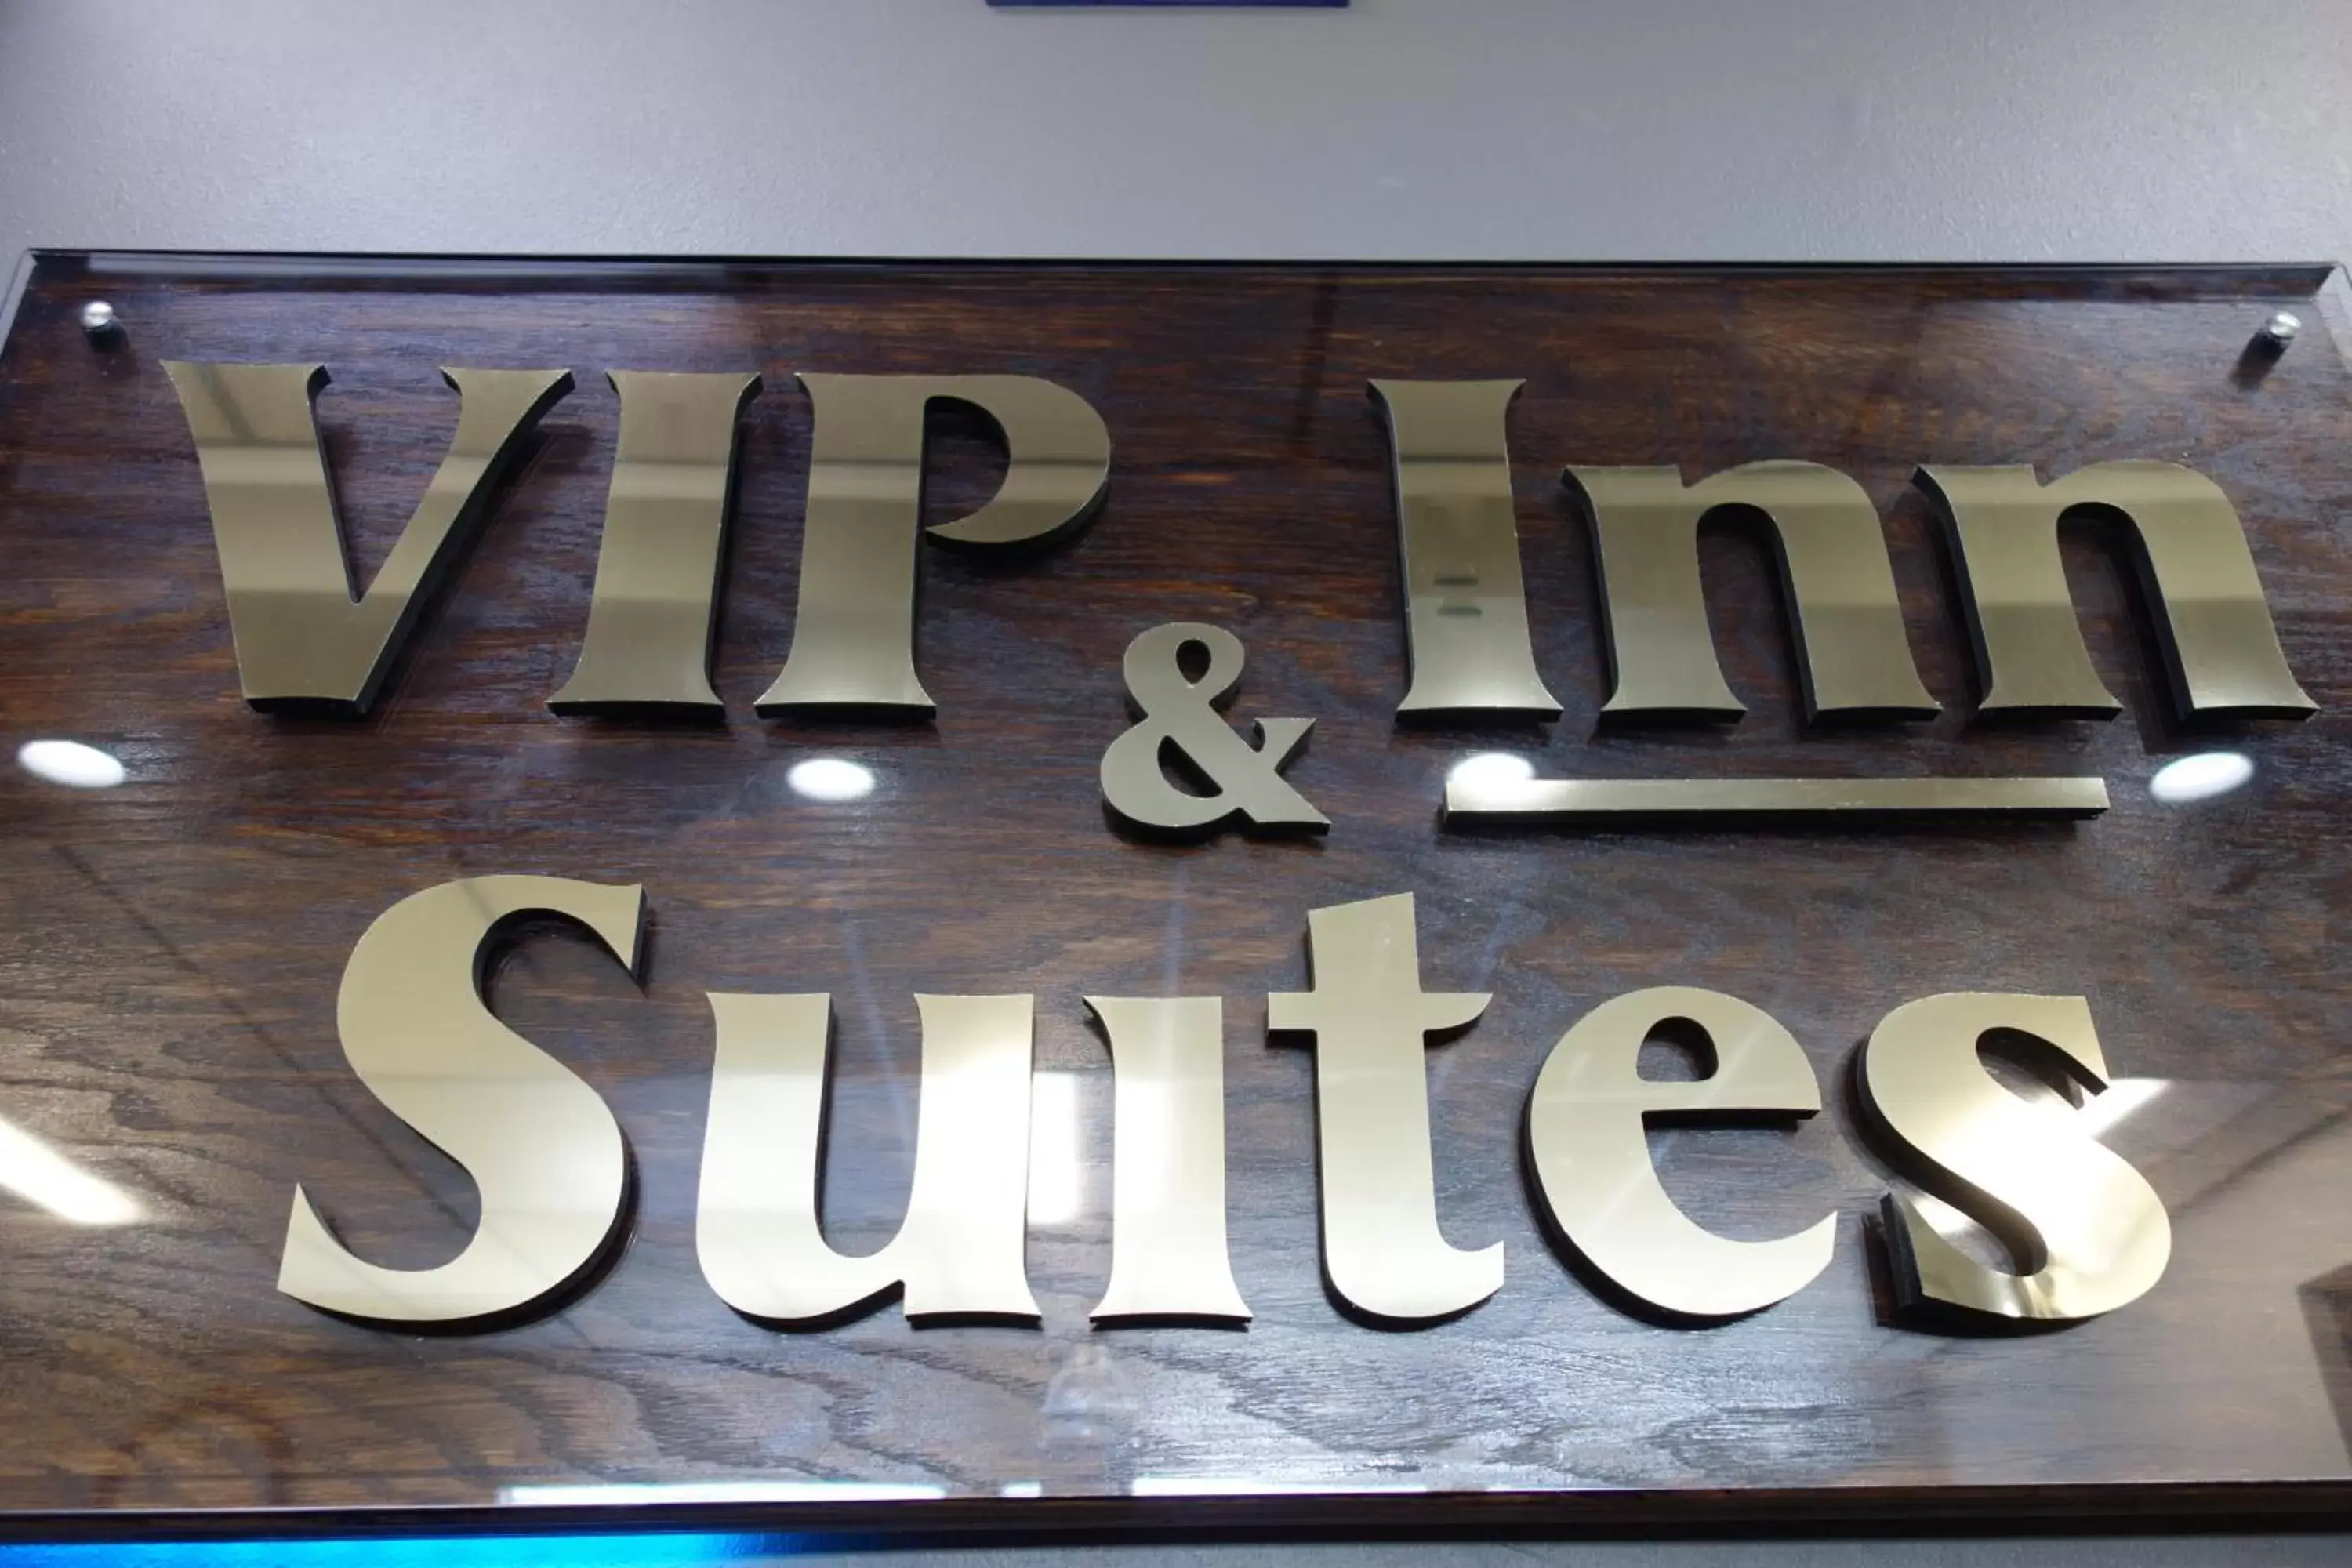 Property logo or sign in VIP Inn and Suites